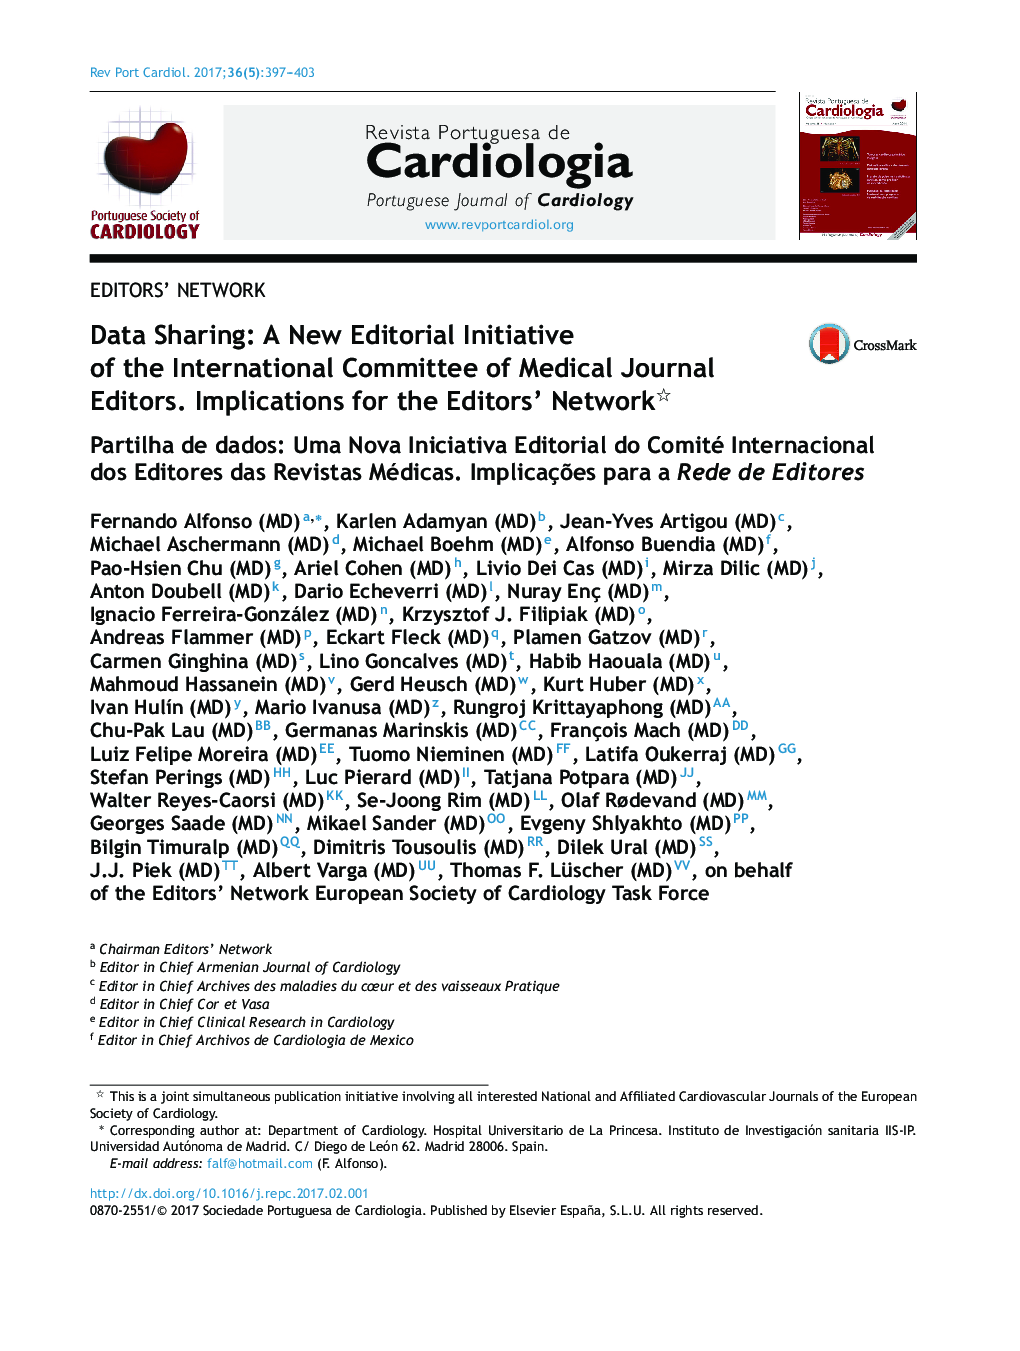 Data Sharing: A New Editorial Initiative of the International Committee of Medical Journal Editors. Implications for the Editors' Network